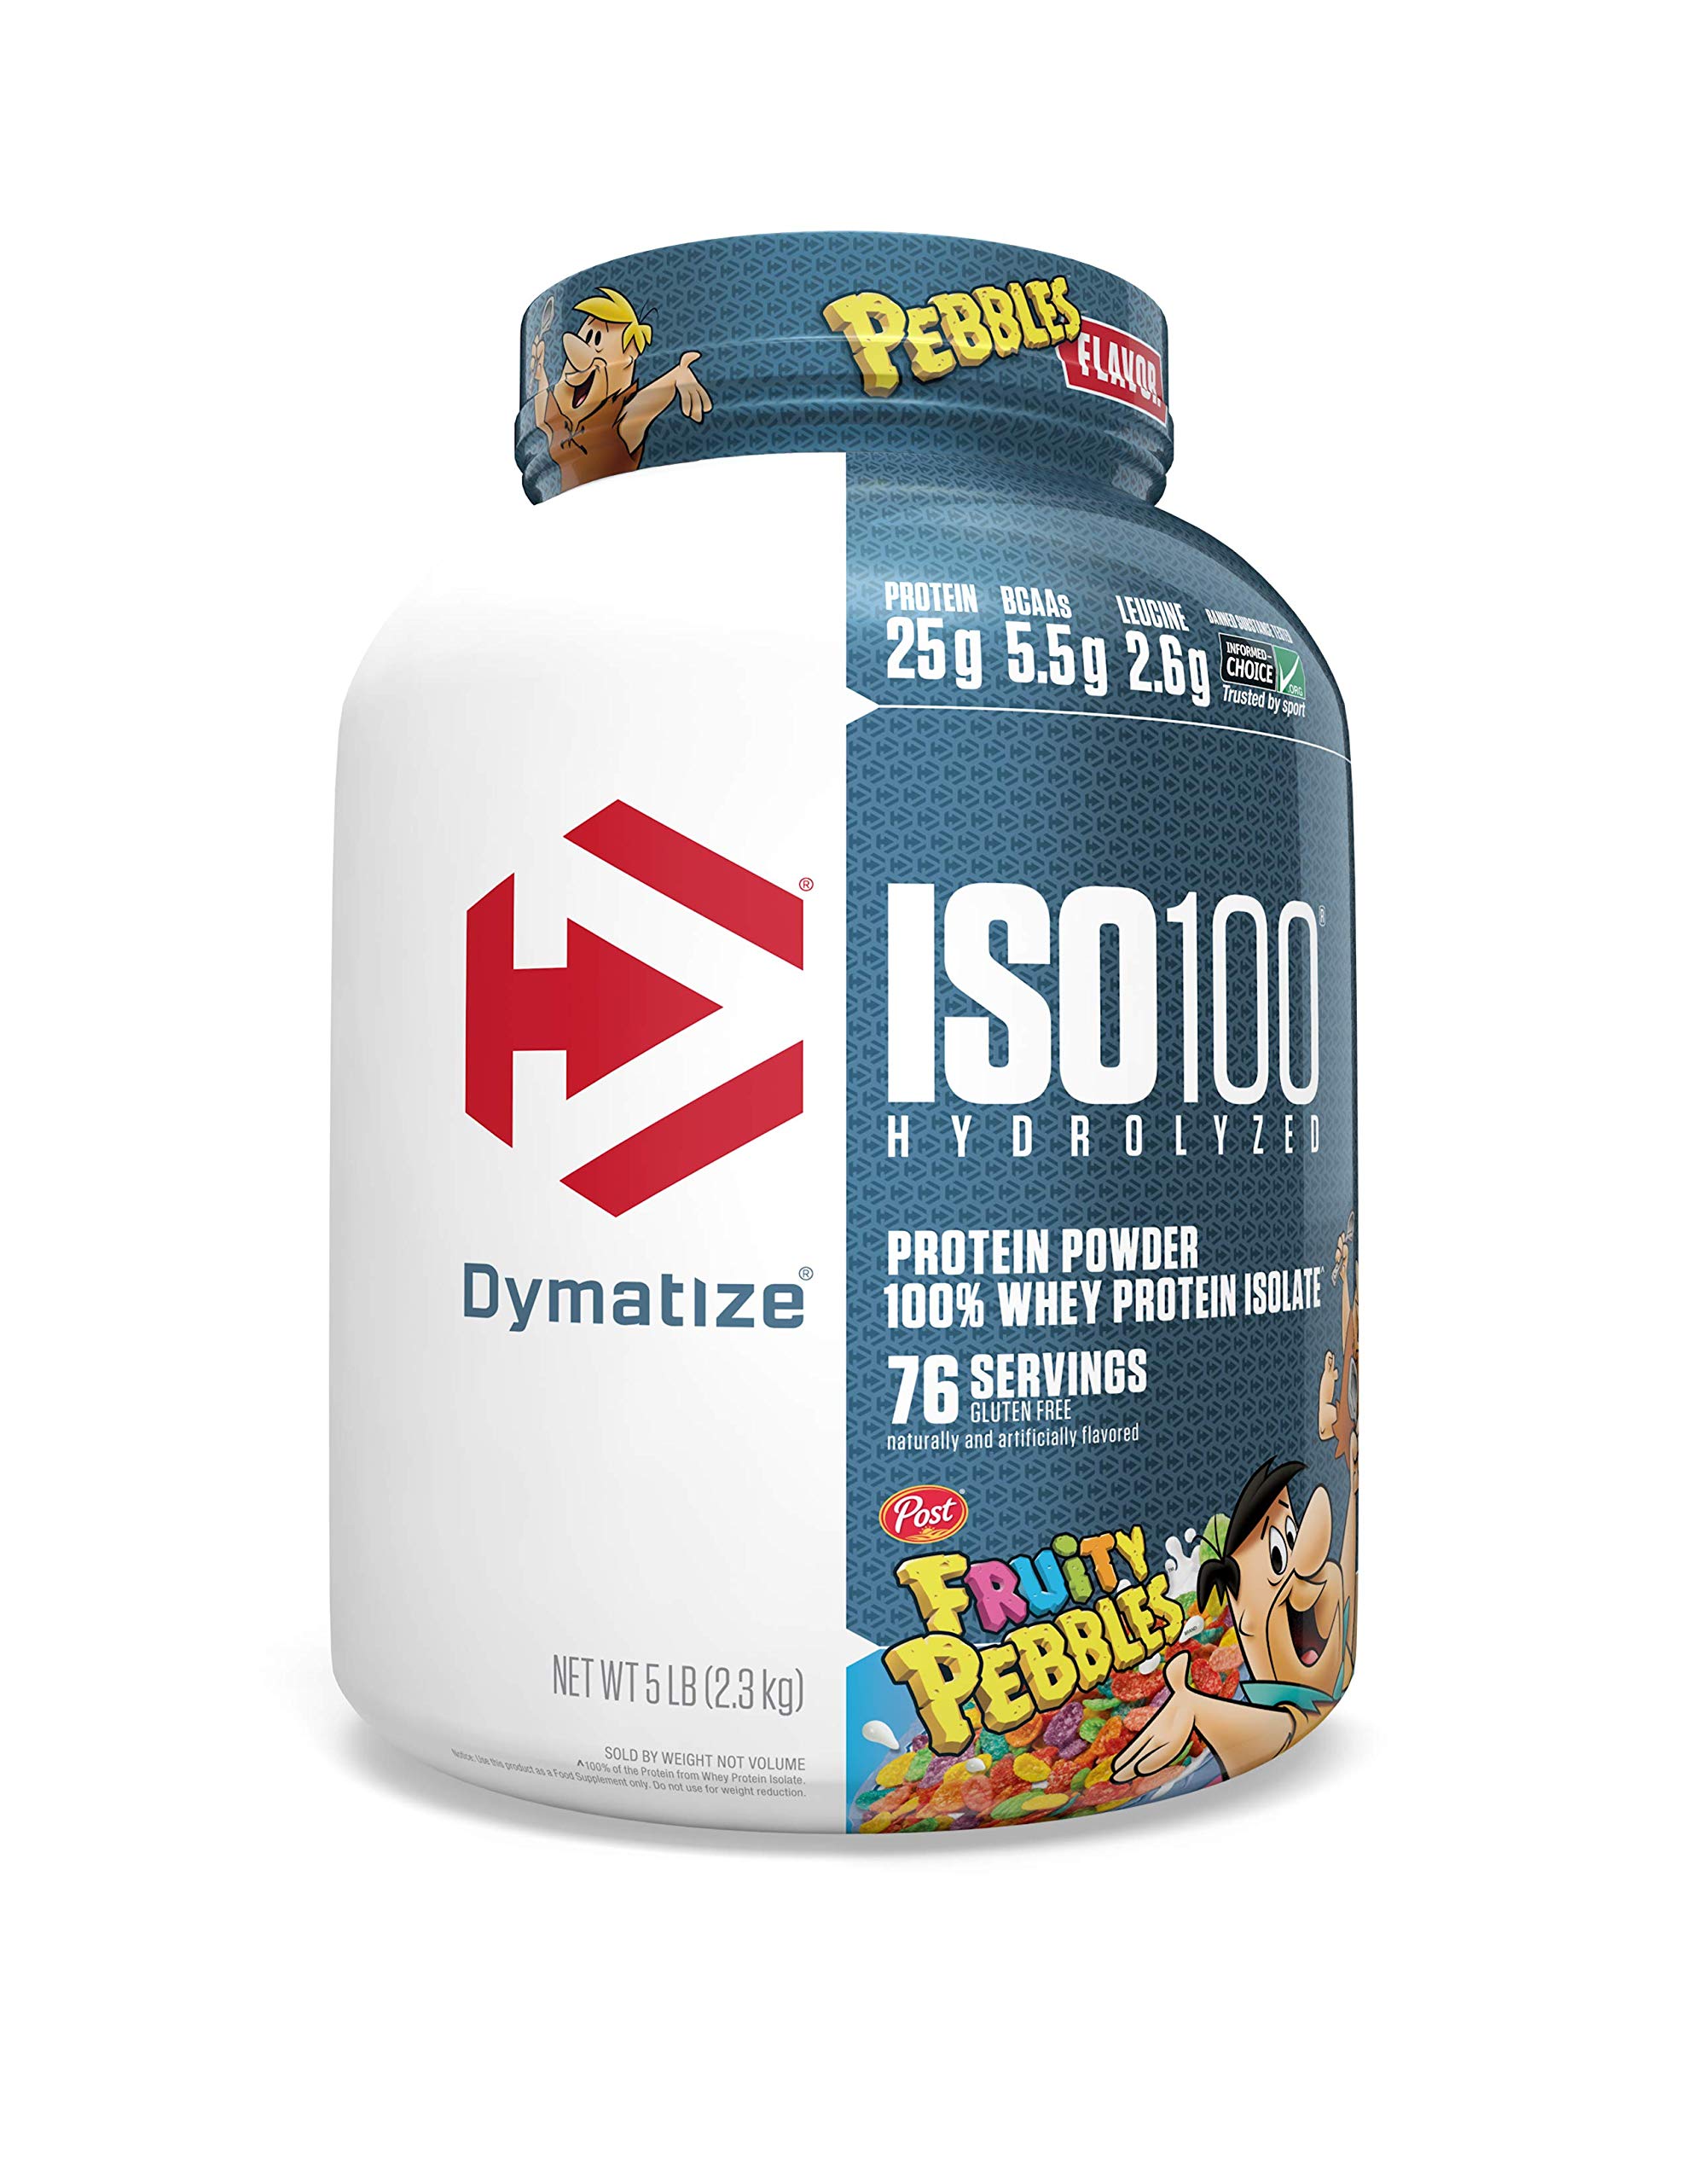 Dymatize ISO100 Hydrolyzed Protein Powder, 100% Whey Isolate Protein, 25g of Protein, 5.5g BCAAs, Gluten Free, Fast Absorbing, Easy Digesting, Fruity Pebbles, 5 Pound - $48.95 YMMV